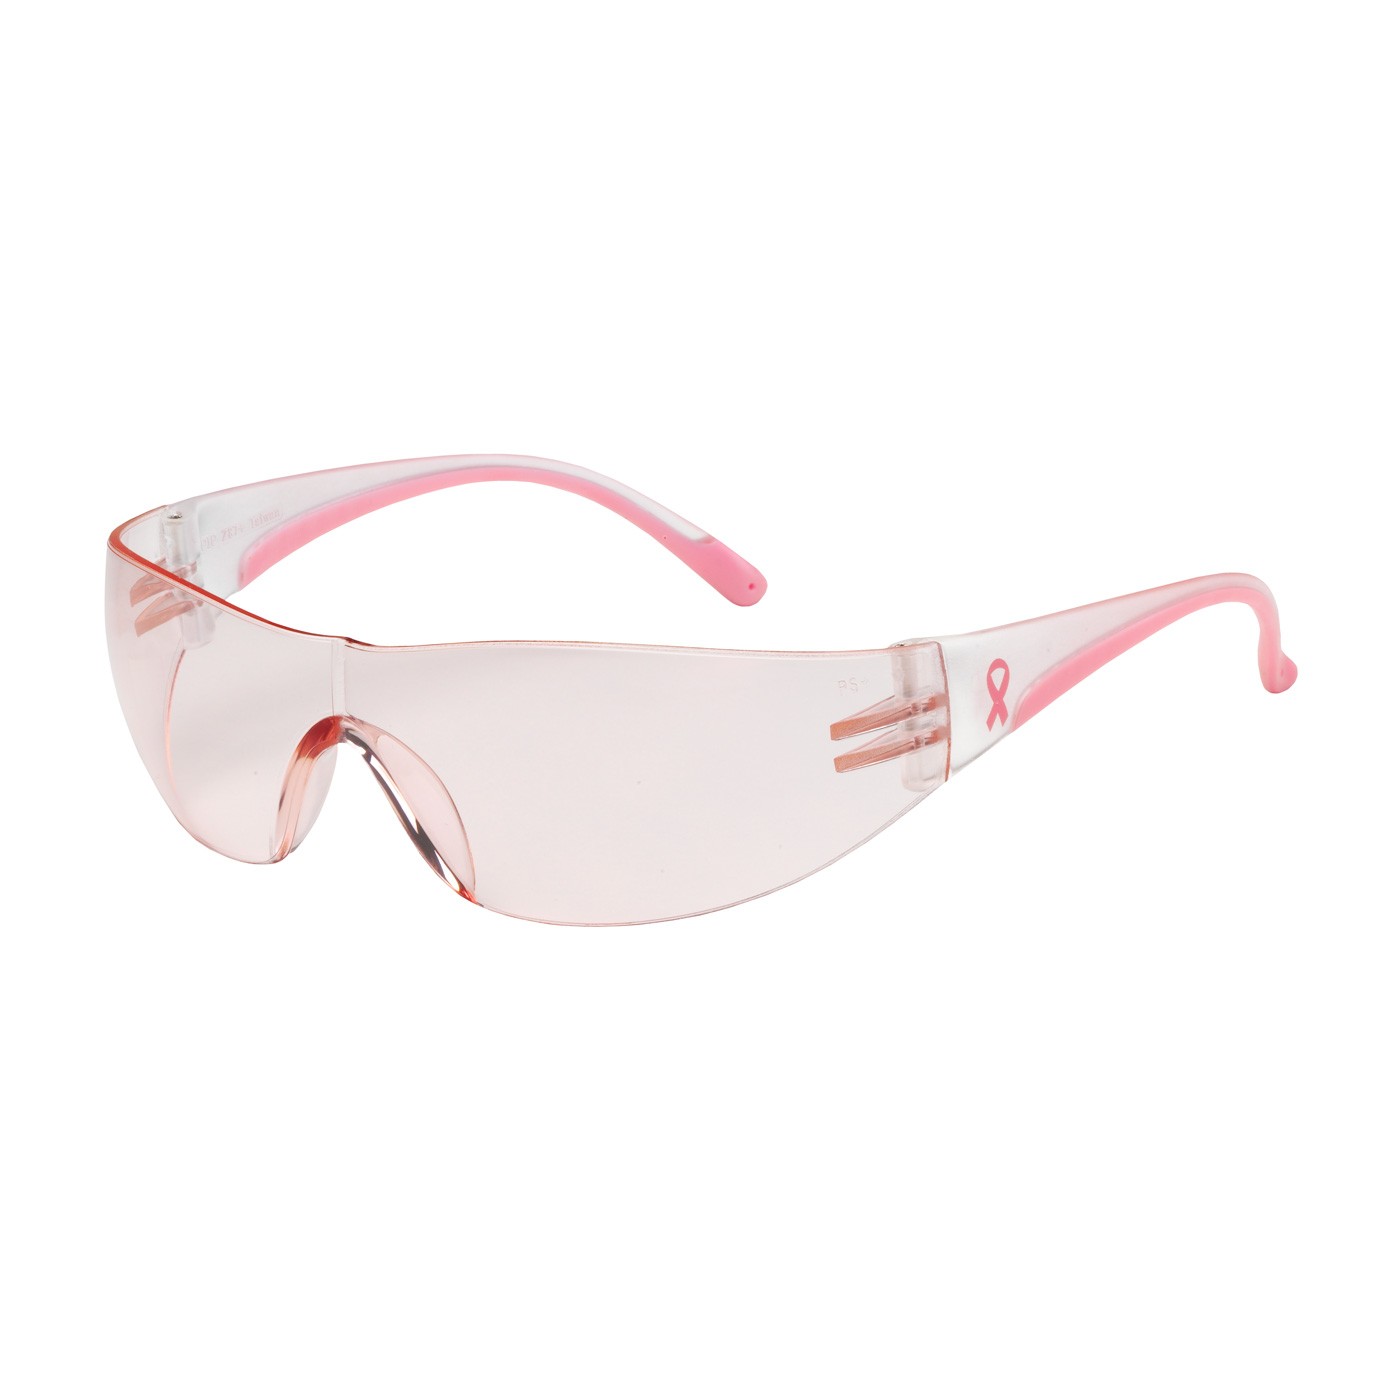 Safety Glasses Rimless Clear Wrap Lens&Temple Pink Tint 12/BX 12/CS